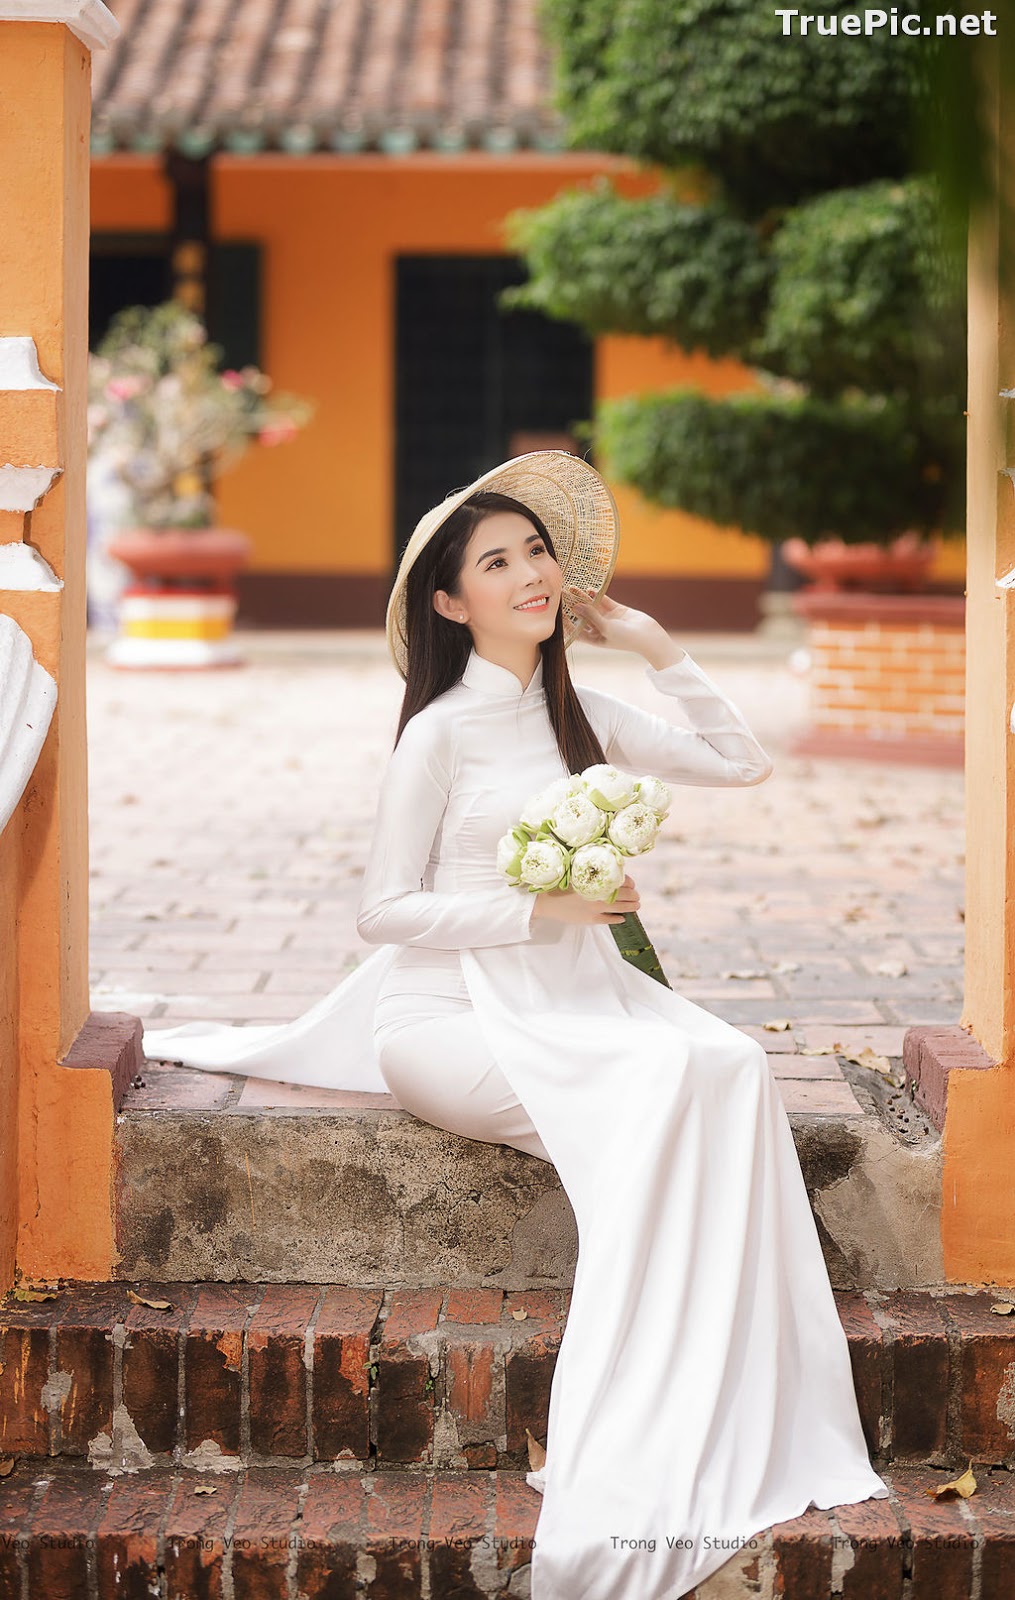 Image The Beauty of Vietnamese Girls with Traditional Dress (Ao Dai) #2 - TruePic.net - Picture-14